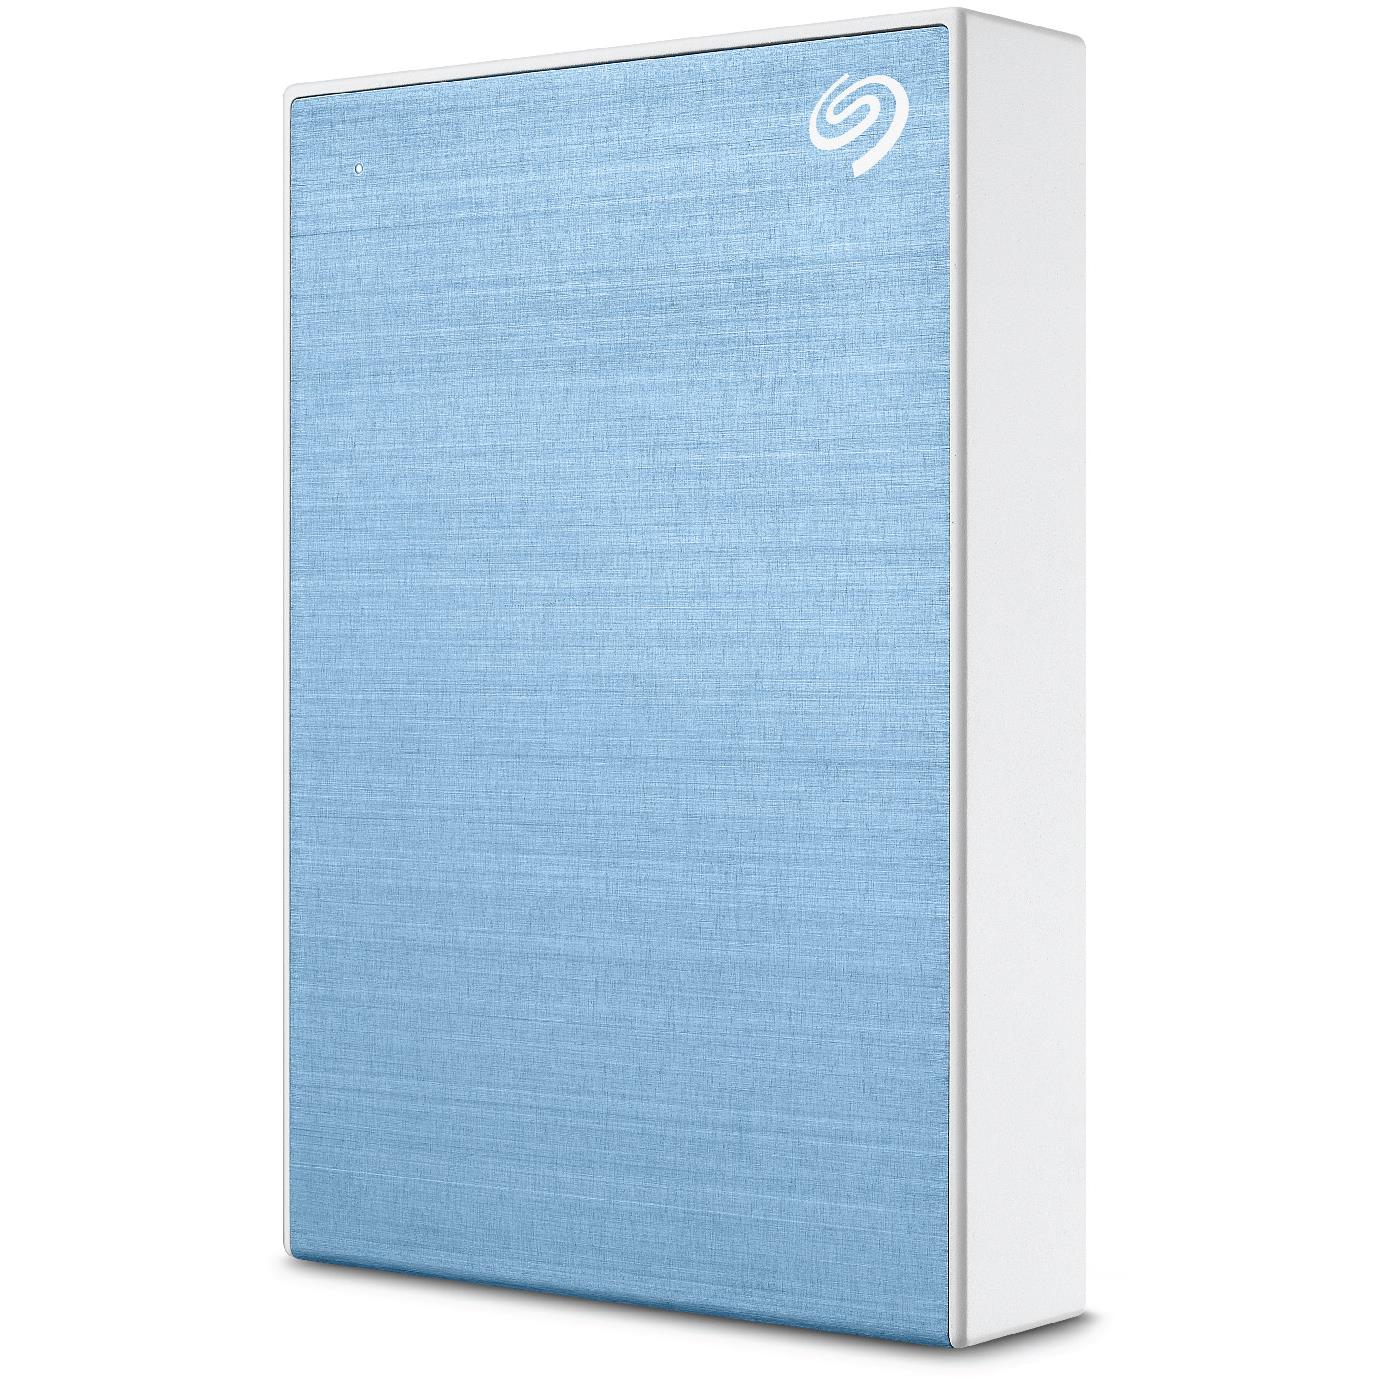 seagate one touch portable 5tb hard drive (blue)